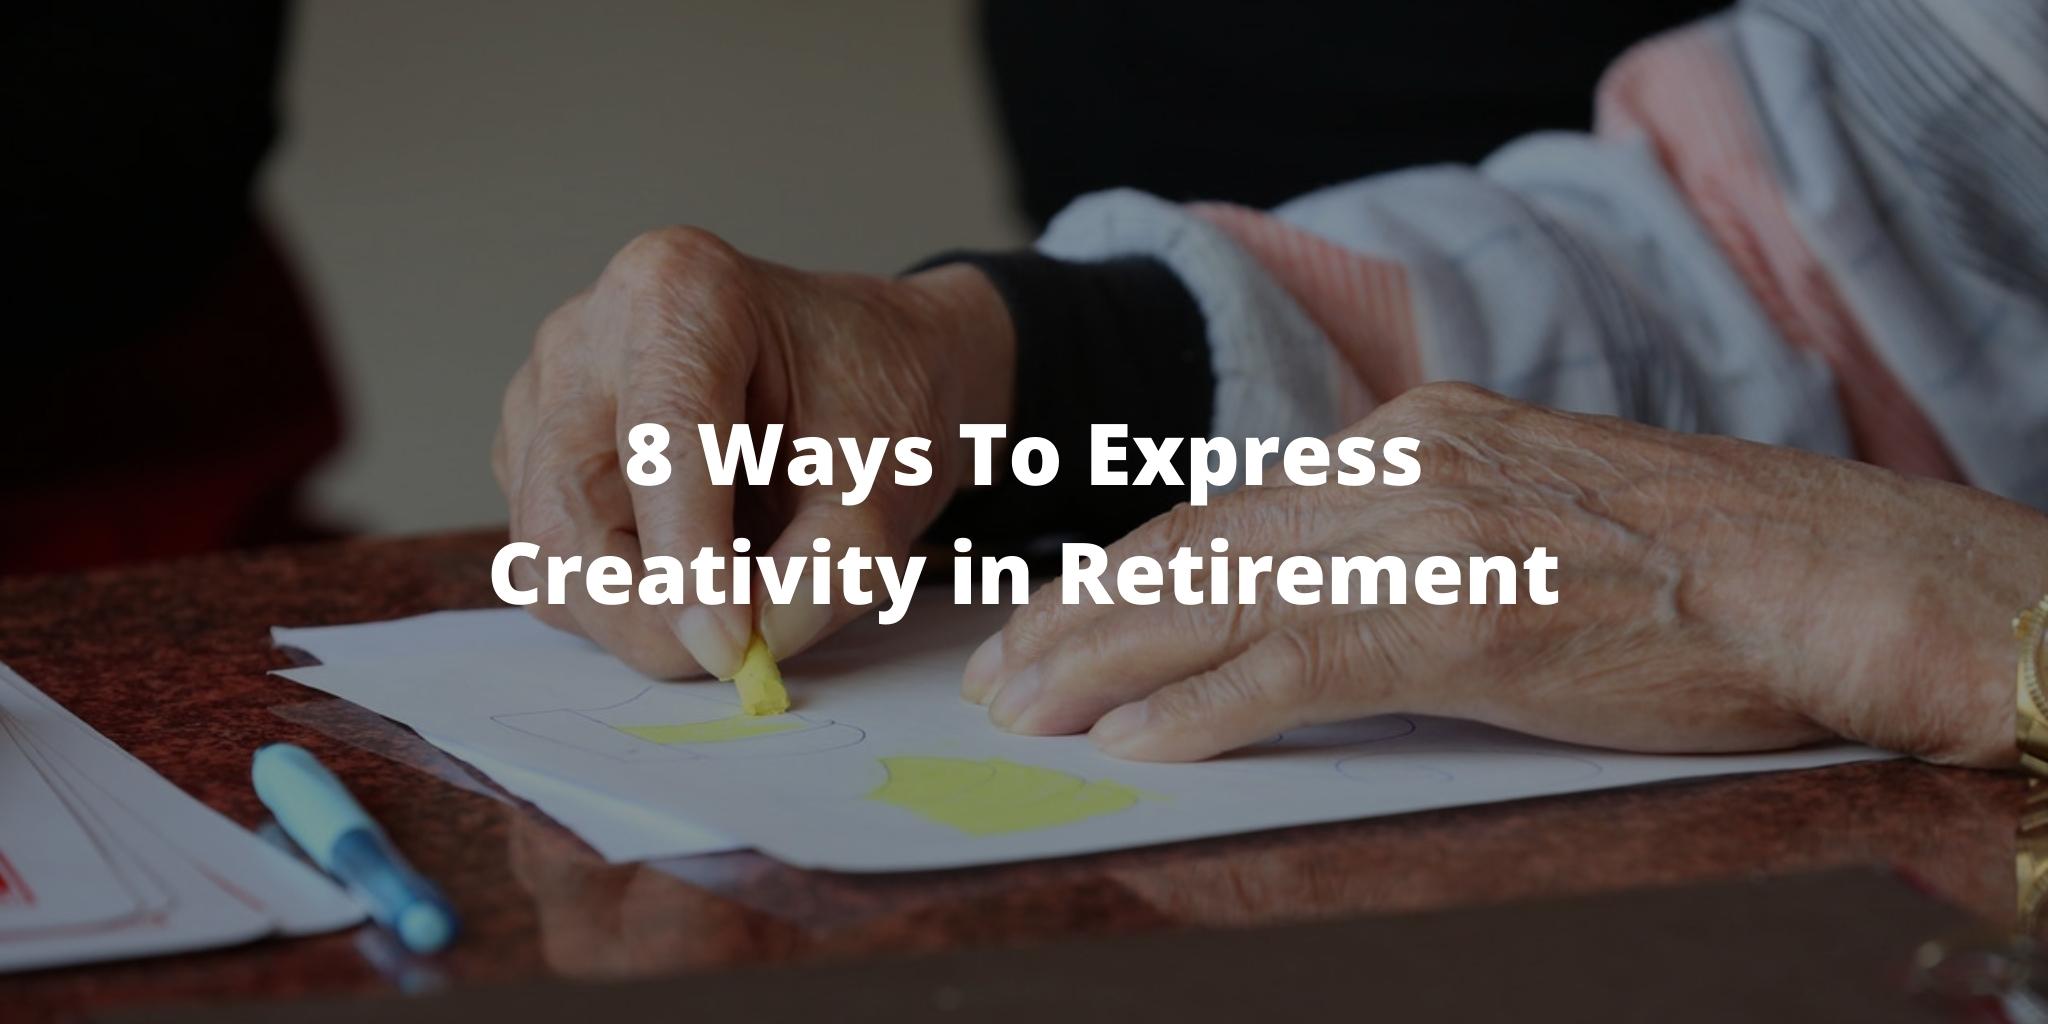 8 Ways To Express Creativity in Retirement